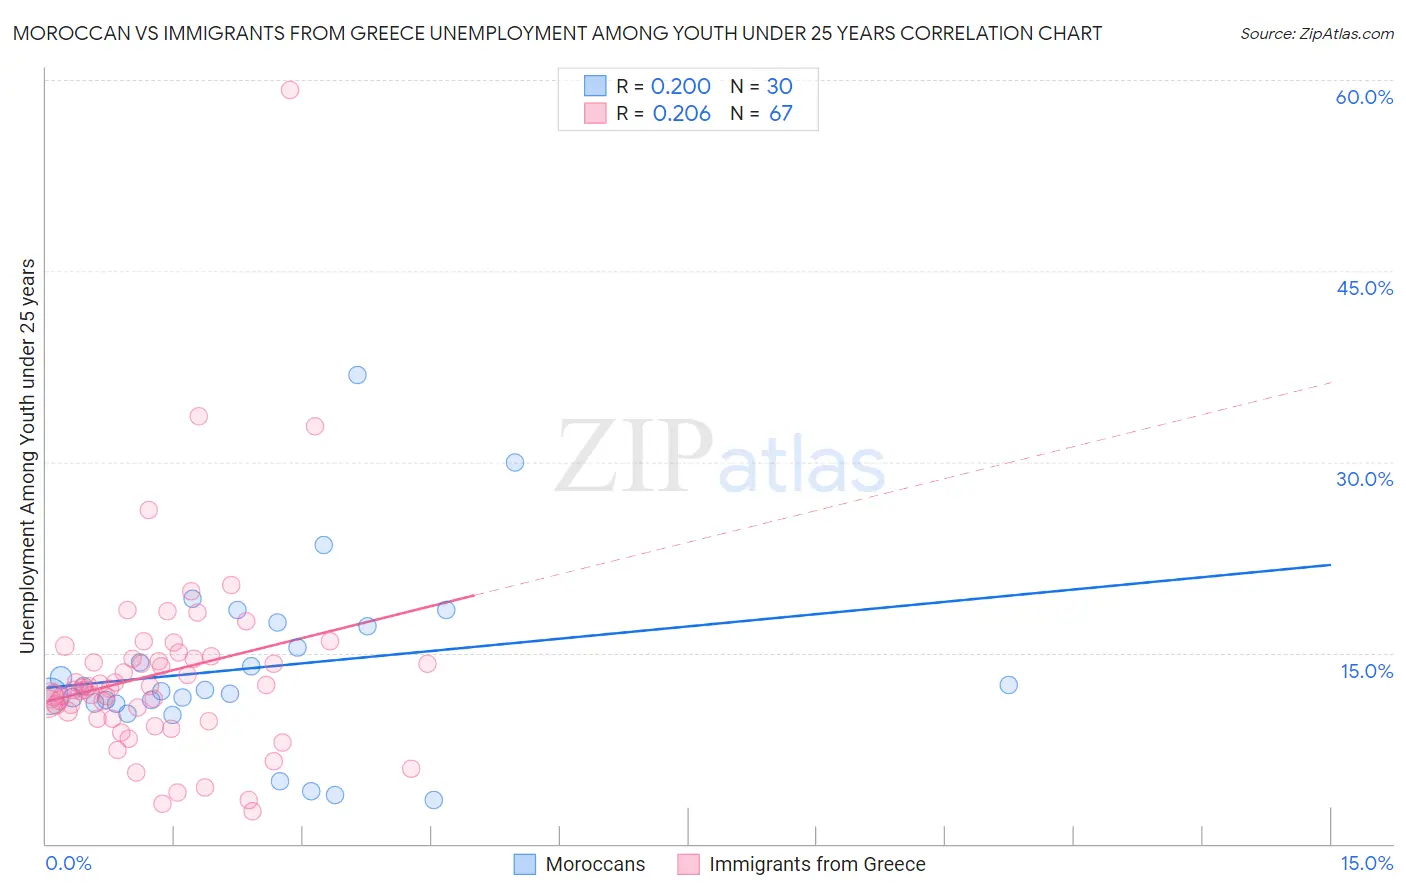 Moroccan vs Immigrants from Greece Unemployment Among Youth under 25 years